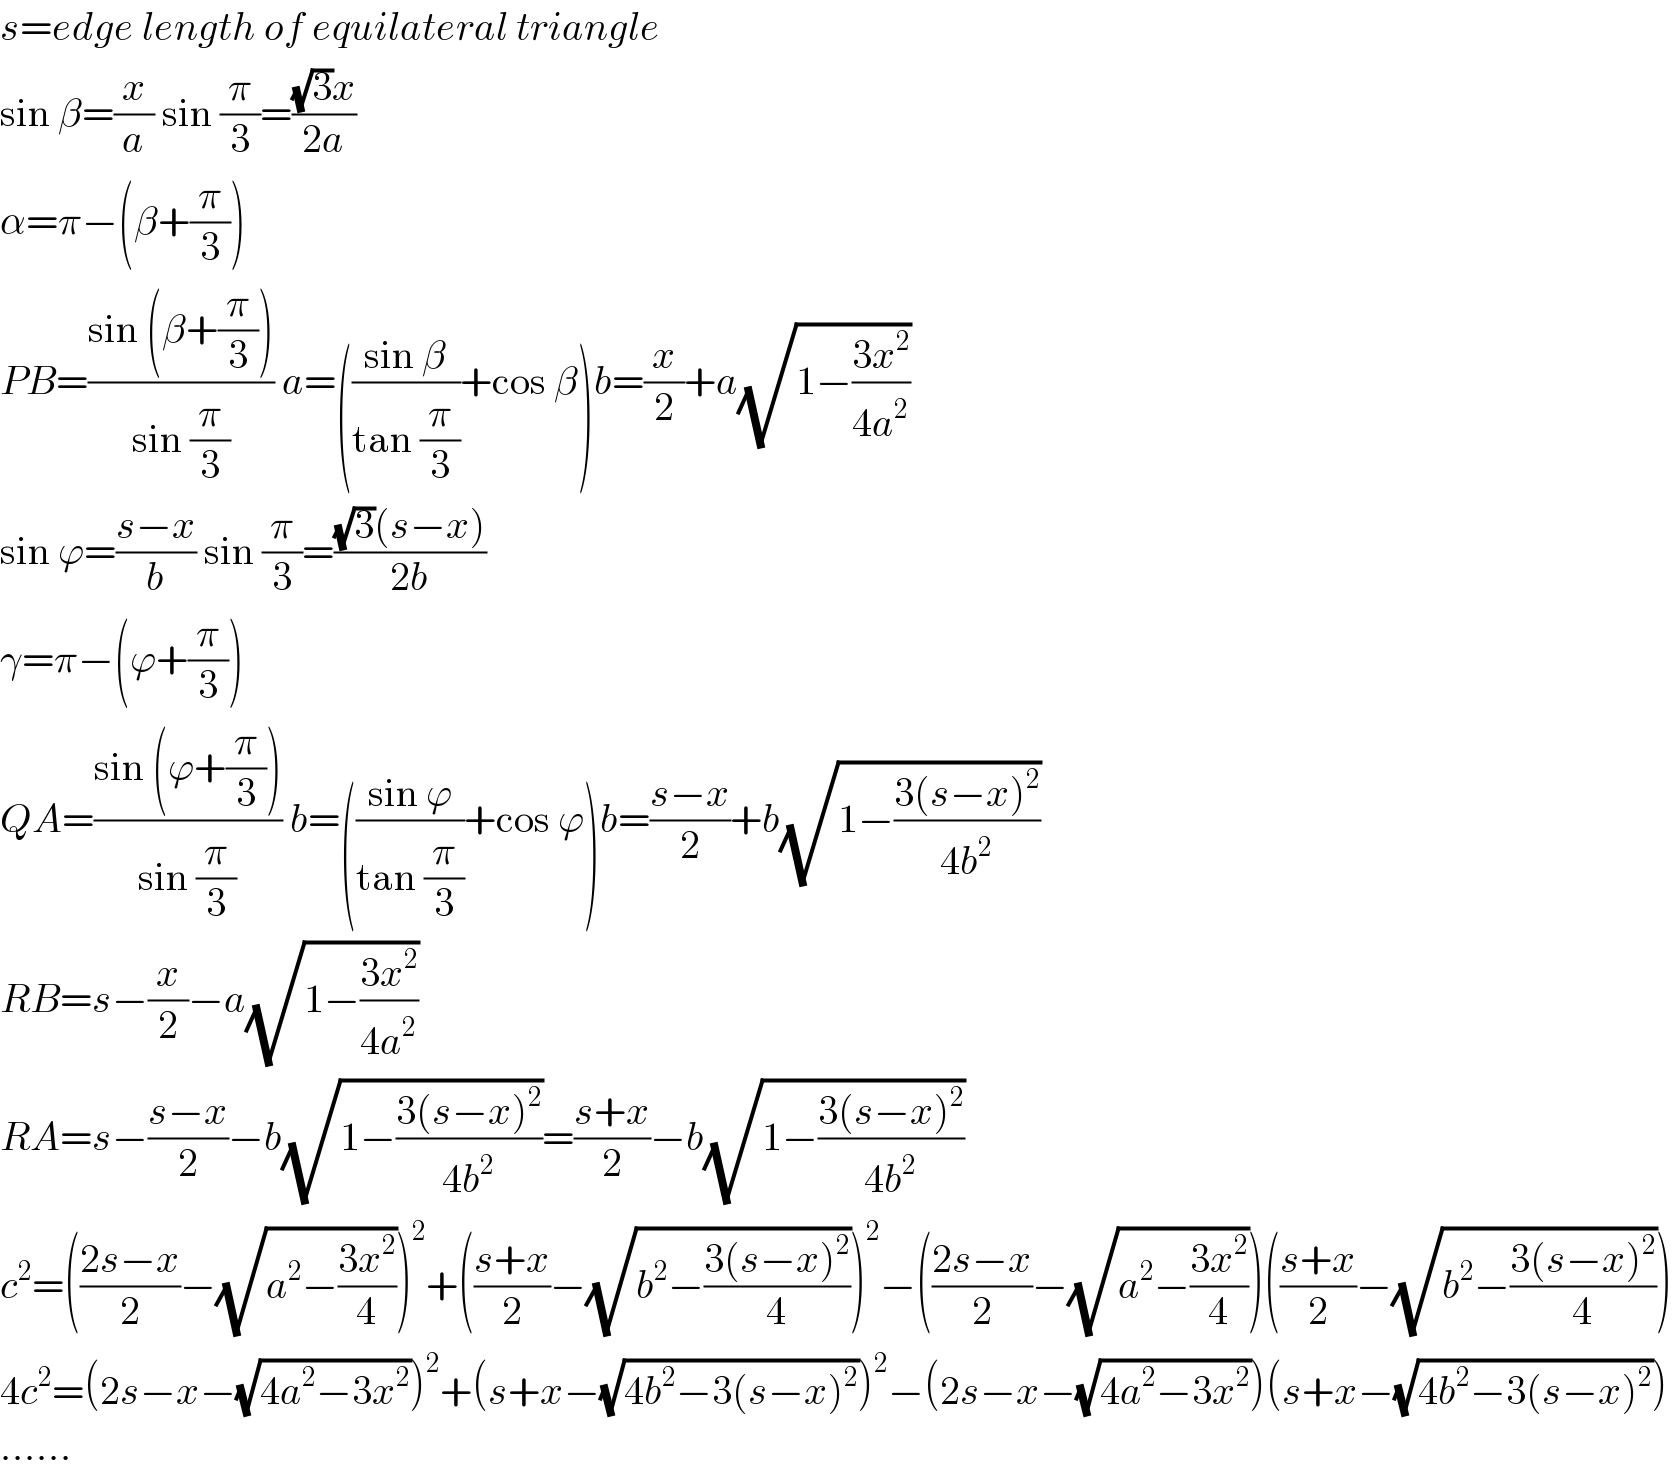 s=edge length of equilateral triangle  sin β=(x/a) sin (π/3)=(((√3)x)/(2a))  α=π−(β+(π/3))  PB=((sin (β+(π/3)))/(sin (π/3))) a=(((sin β)/(tan (π/3)))+cos β)b=(x/2)+a(√(1−((3x^2 )/(4a^2 ))))  sin ϕ=((s−x)/b) sin (π/3)=(((√3)(s−x))/(2b))  γ=π−(ϕ+(π/3))  QA=((sin (ϕ+(π/3)))/(sin (π/3))) b=(((sin ϕ)/(tan (π/3)))+cos ϕ)b=((s−x)/2)+b(√(1−((3(s−x)^2 )/(4b^2 ))))  RB=s−(x/2)−a(√(1−((3x^2 )/(4a^2 ))))  RA=s−((s−x)/2)−b(√(1−((3(s−x)^2 )/(4b^2 ))))=((s+x)/2)−b(√(1−((3(s−x)^2 )/(4b^2 ))))  c^2 =(((2s−x)/2)−(√(a^2 −((3x^2 )/4))))^2 +(((s+x)/2)−(√(b^2 −((3(s−x)^2 )/4))))^2 −(((2s−x)/2)−(√(a^2 −((3x^2 )/4))))(((s+x)/2)−(√(b^2 −((3(s−x)^2 )/4))))  4c^2 =(2s−x−(√(4a^2 −3x^2 )))^2 +(s+x−(√(4b^2 −3(s−x)^2 )))^2 −(2s−x−(√(4a^2 −3x^2 )))(s+x−(√(4b^2 −3(s−x)^2 )))  ......  